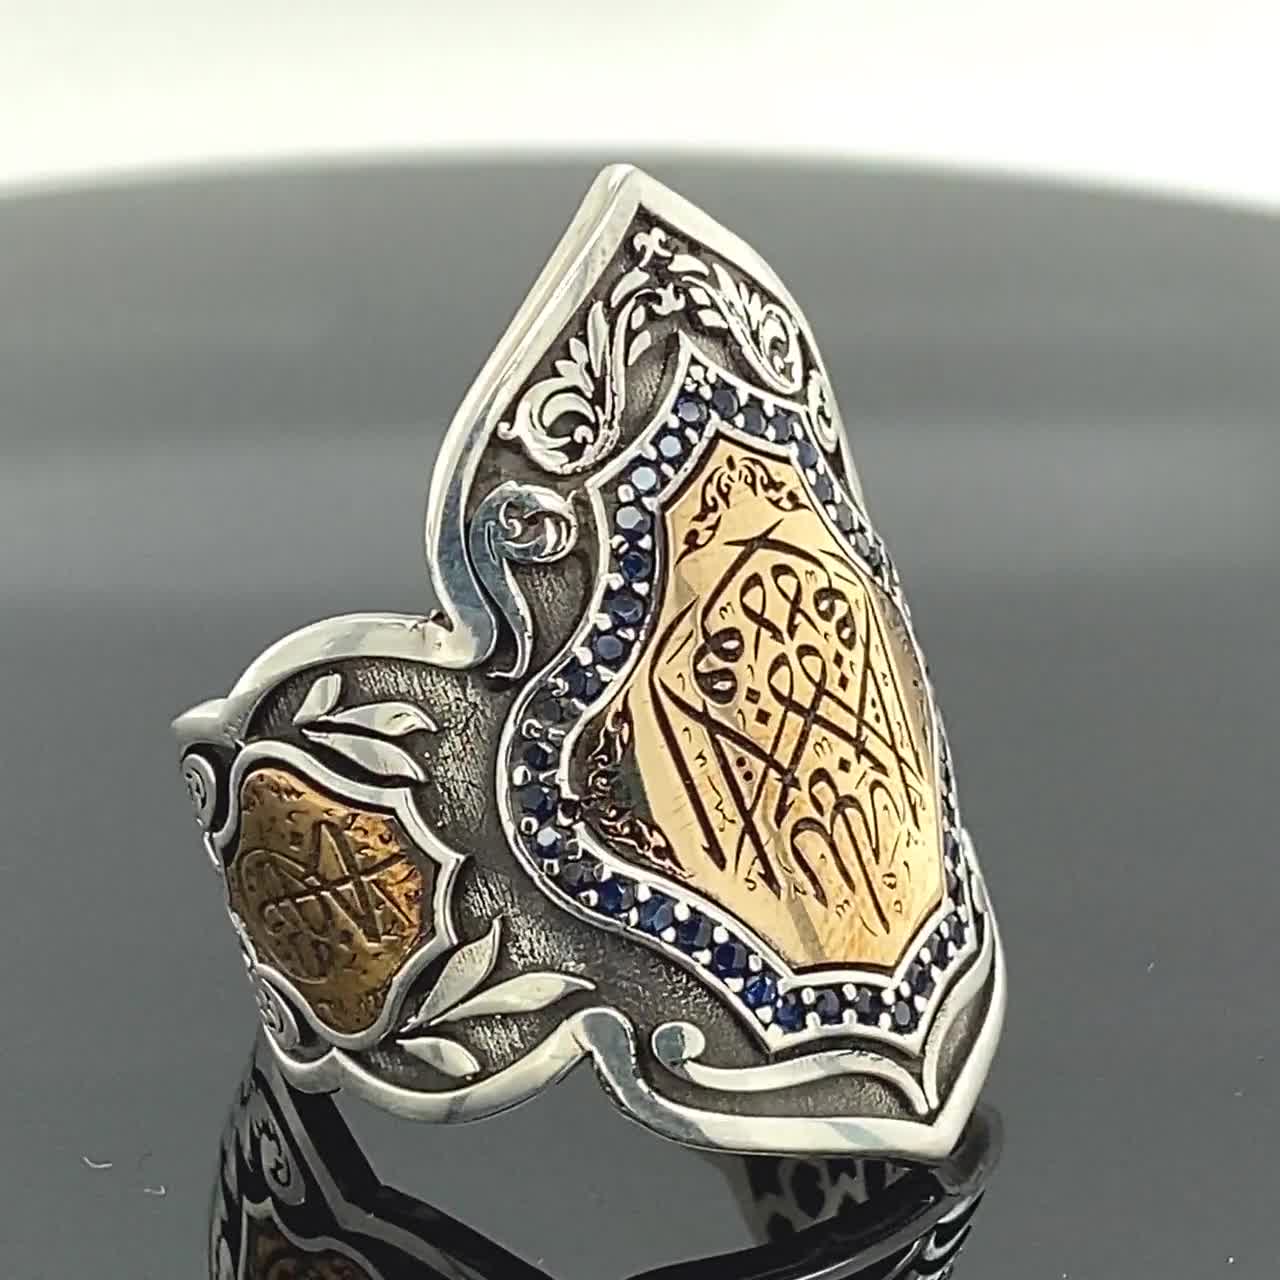 Solid 925 Sterling Silver Archer Thumb Ottoman Turkish Men's Ring | eBay